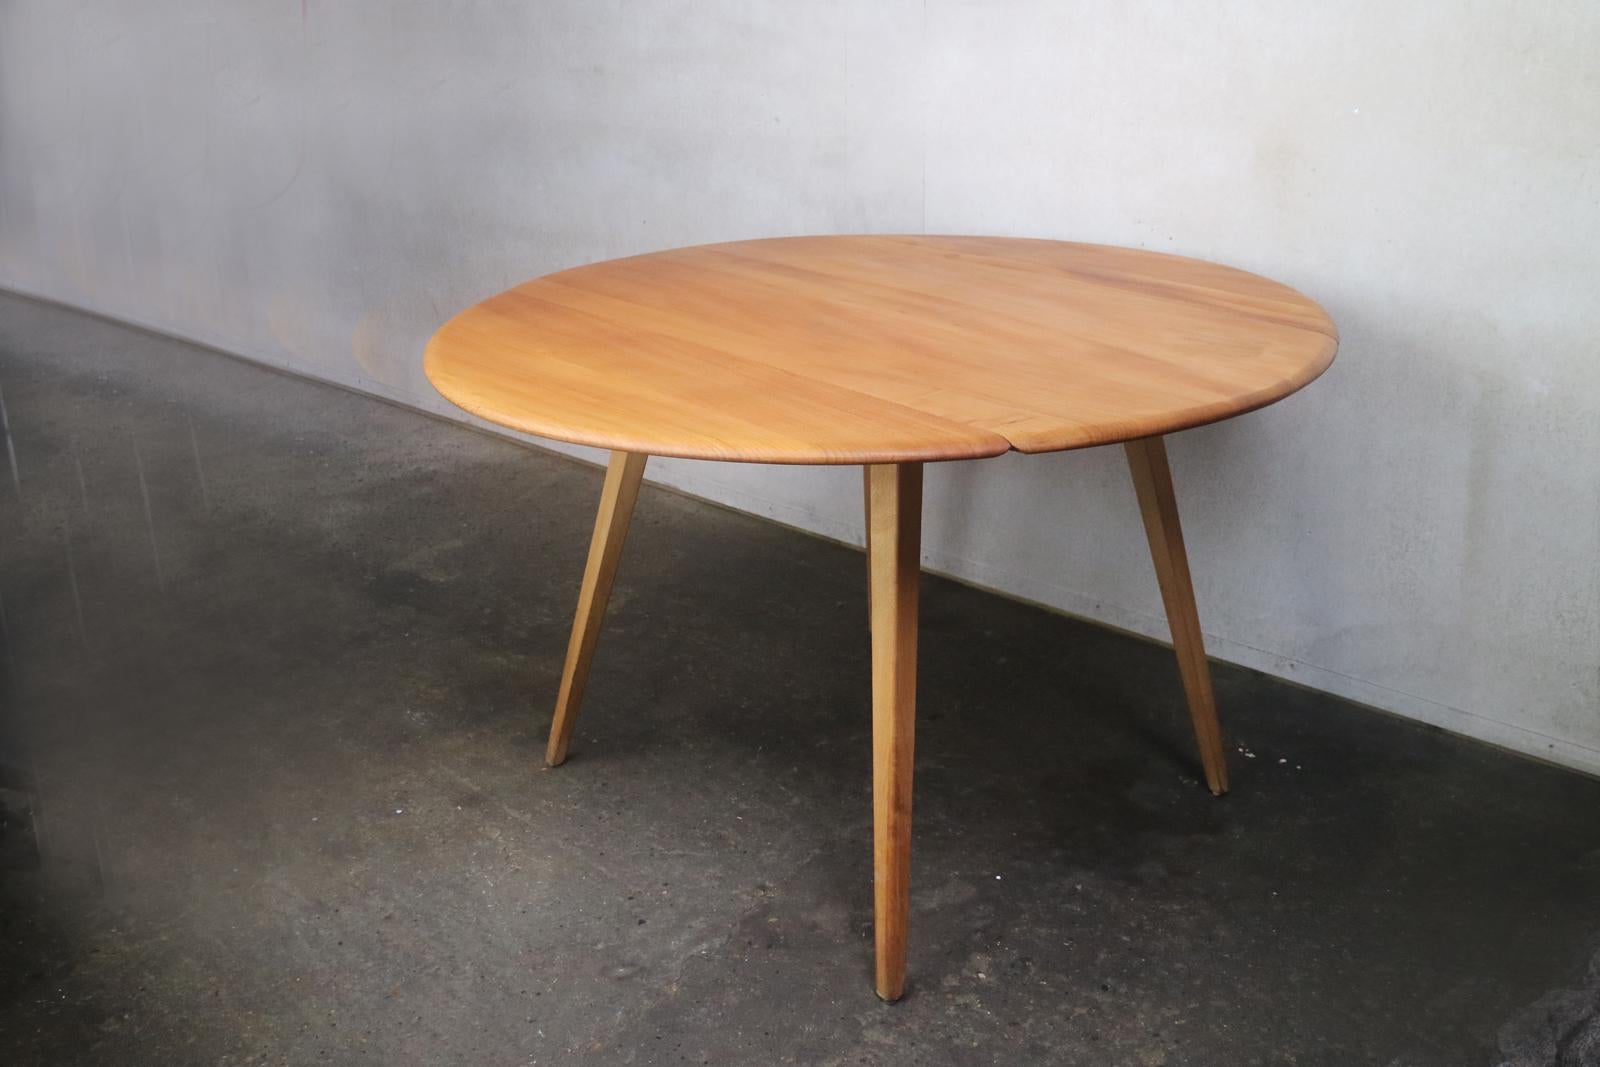 This light colored drop-leaf table has proven to be a popular and Classic Ercol design since the mid-1950s. Raised on splayed tapering solid beech legs, the solid elm tabletop converts from an oblong to the circular shape.